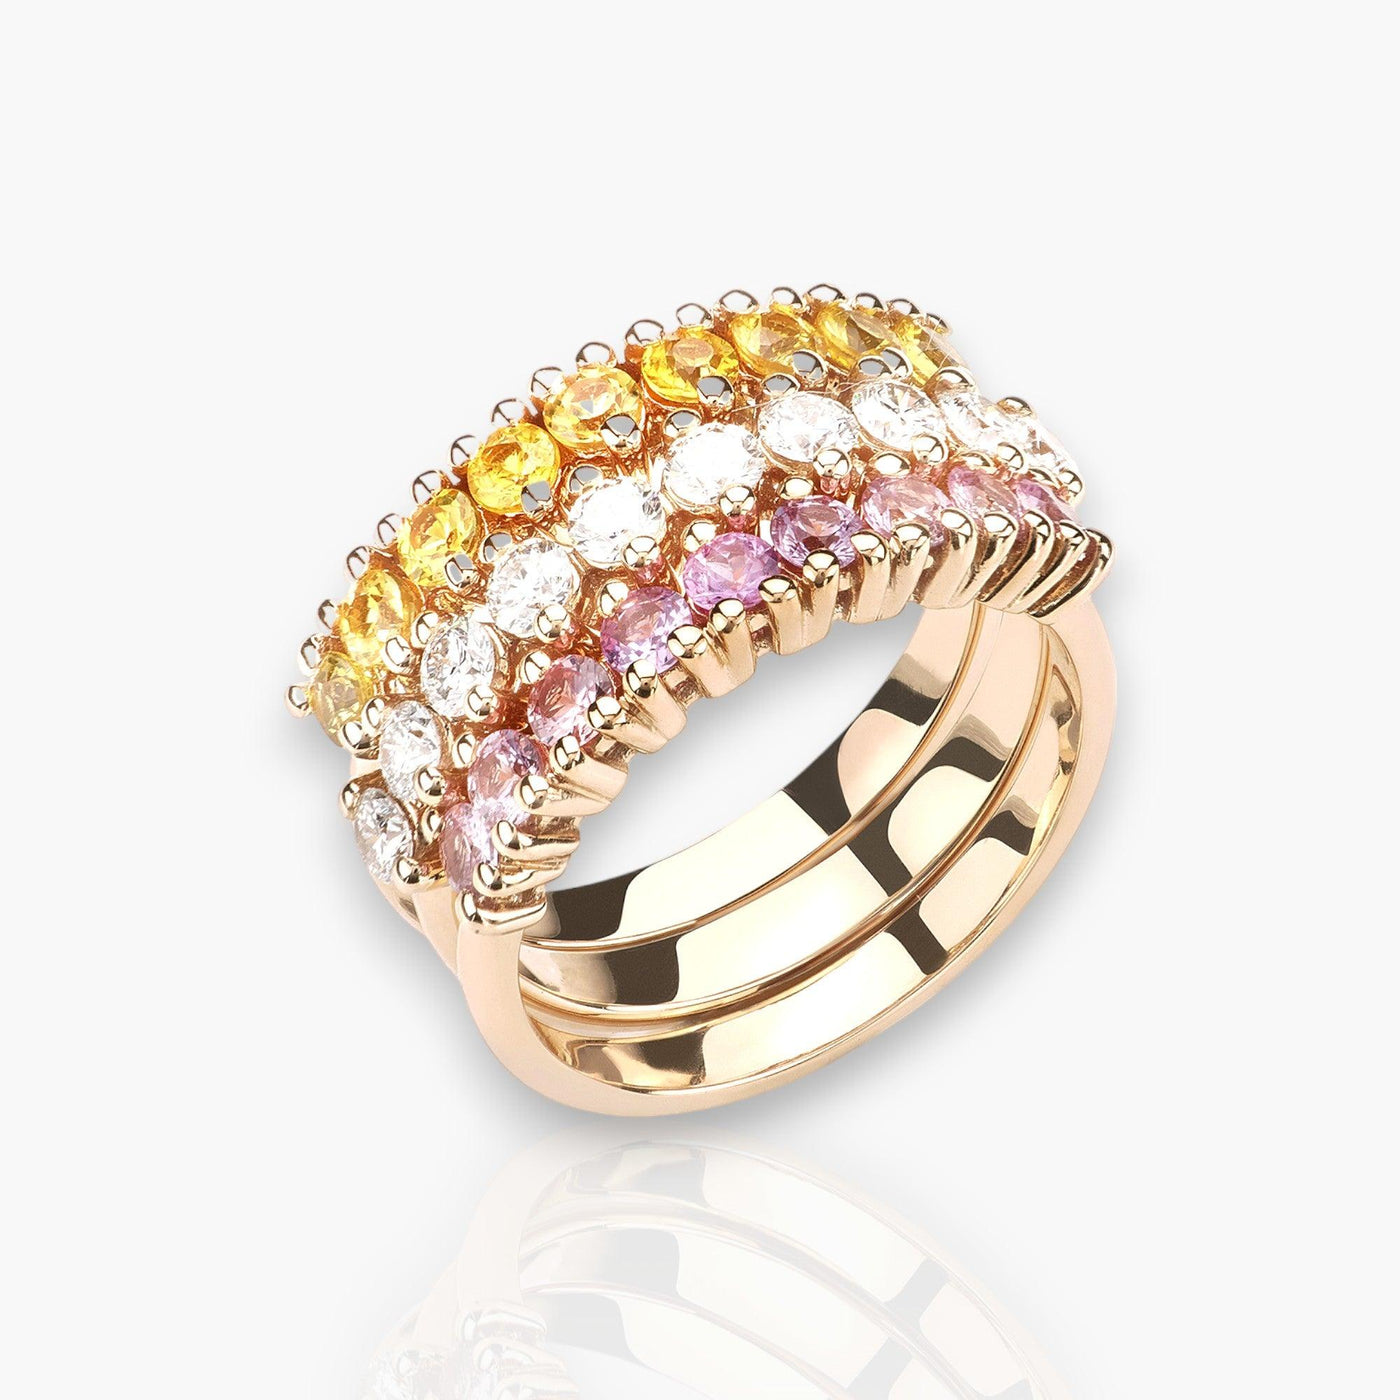 Riviera Ring in Rose Gold With Diamonds - Moregola Fine Jewelry